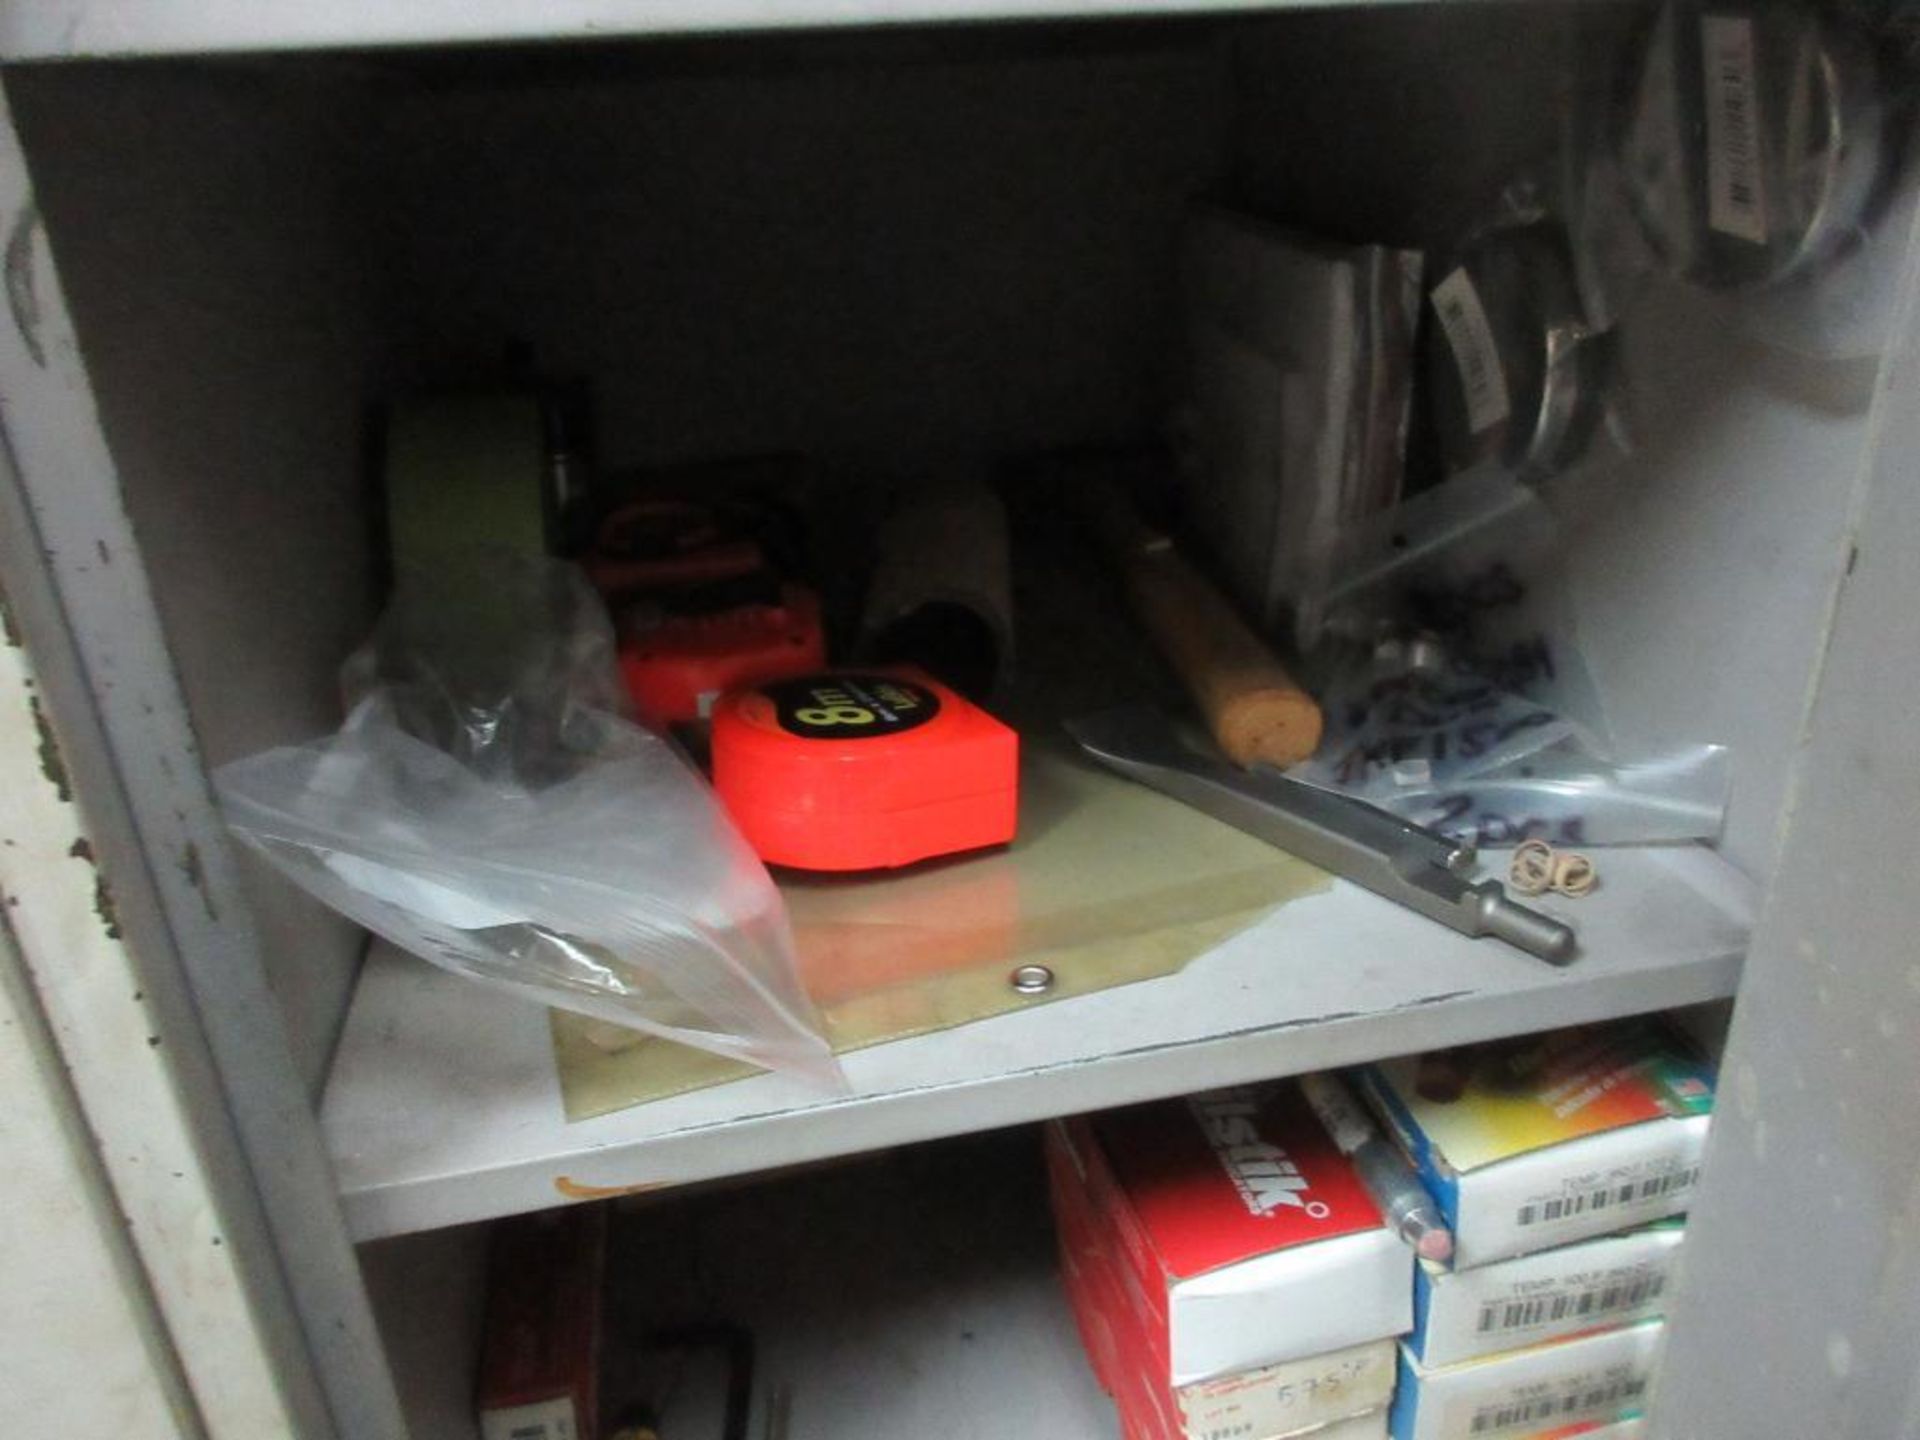 CONTENTS OF 3 CABINETS IN WORK AREA, TEST AND MEASUREMENT EQUIPMENT, METERS, TOOLS, ETC (OFFICES) - Image 17 of 18